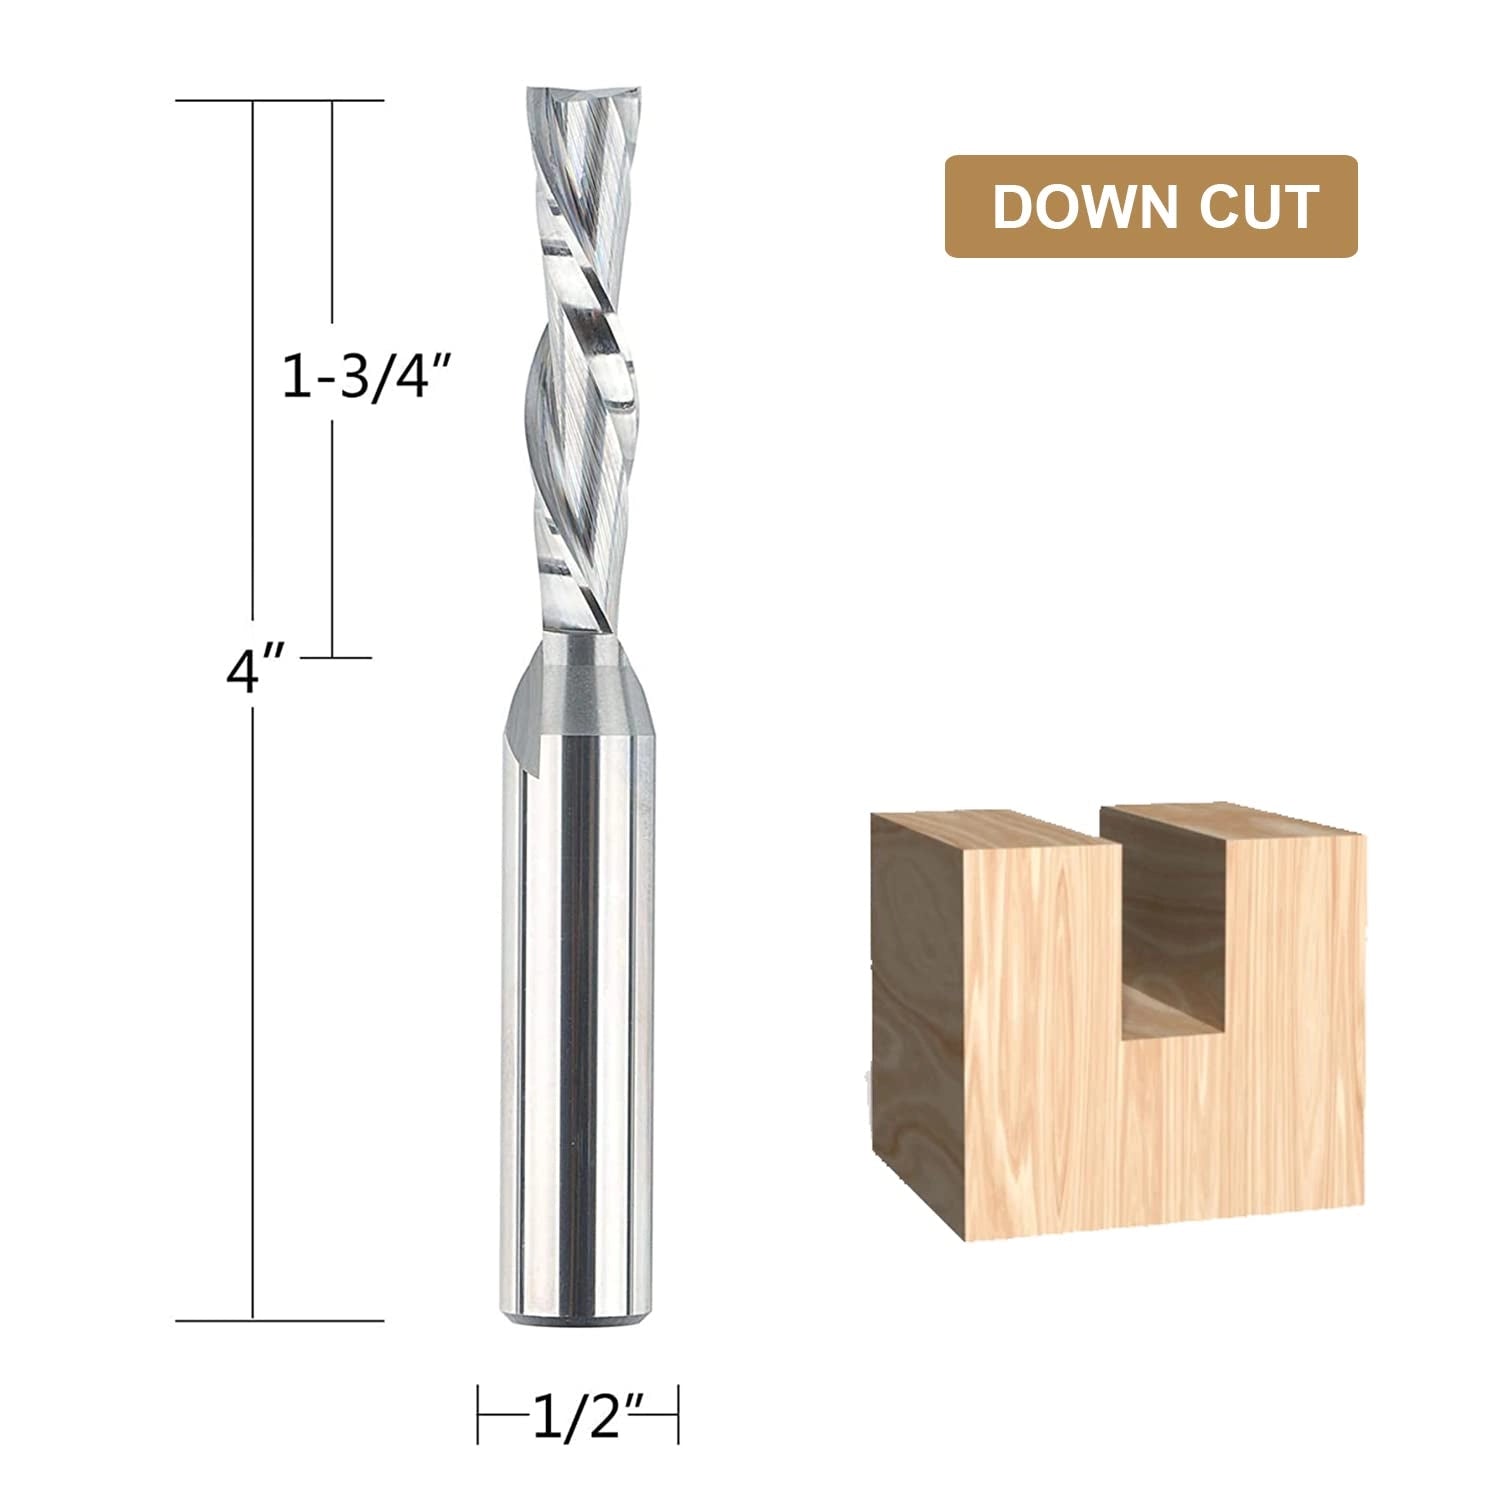 SpeTool Downcut 3/8" Diam 1/2" SHK 4" Extra Long Router Bit for Wood Small Cut